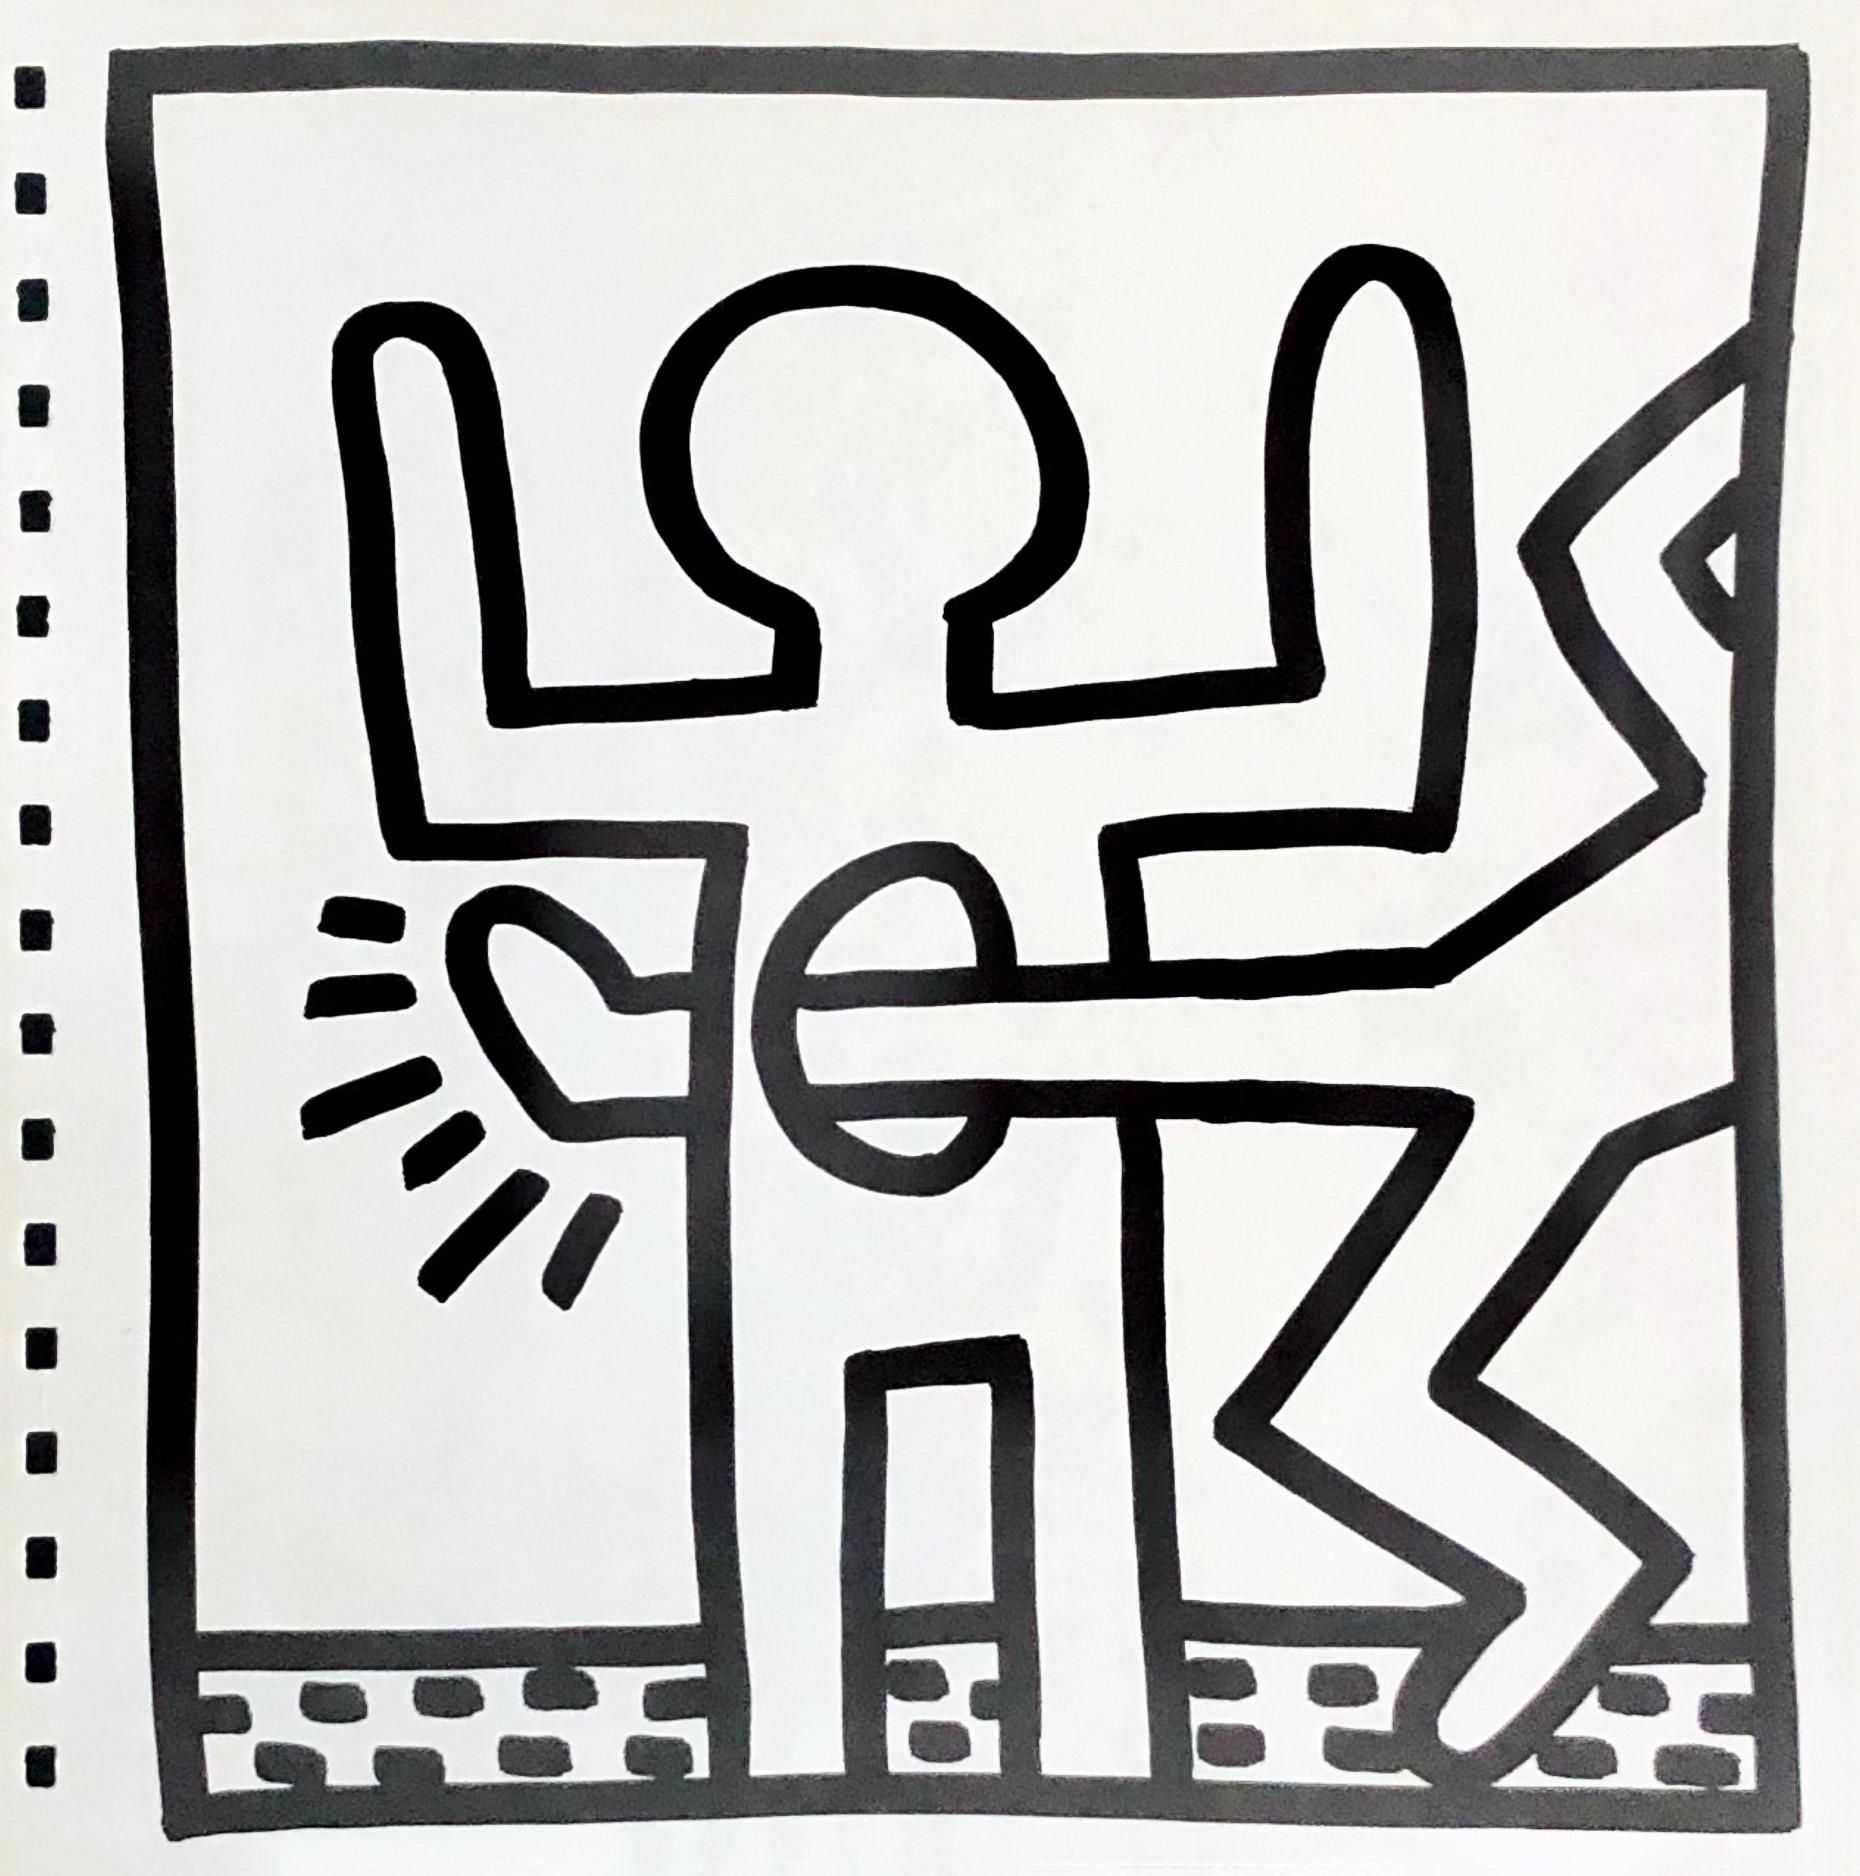 Keith Haring (untitled) Crocodile Lithograph 1982
Double-sided offset lithograph published by Tony Shafrazi Gallery, New York, 1982 from an edition of 2000. 

Single sheet lithograph from the seminal spiral bound, early monograph showcasing Haring's